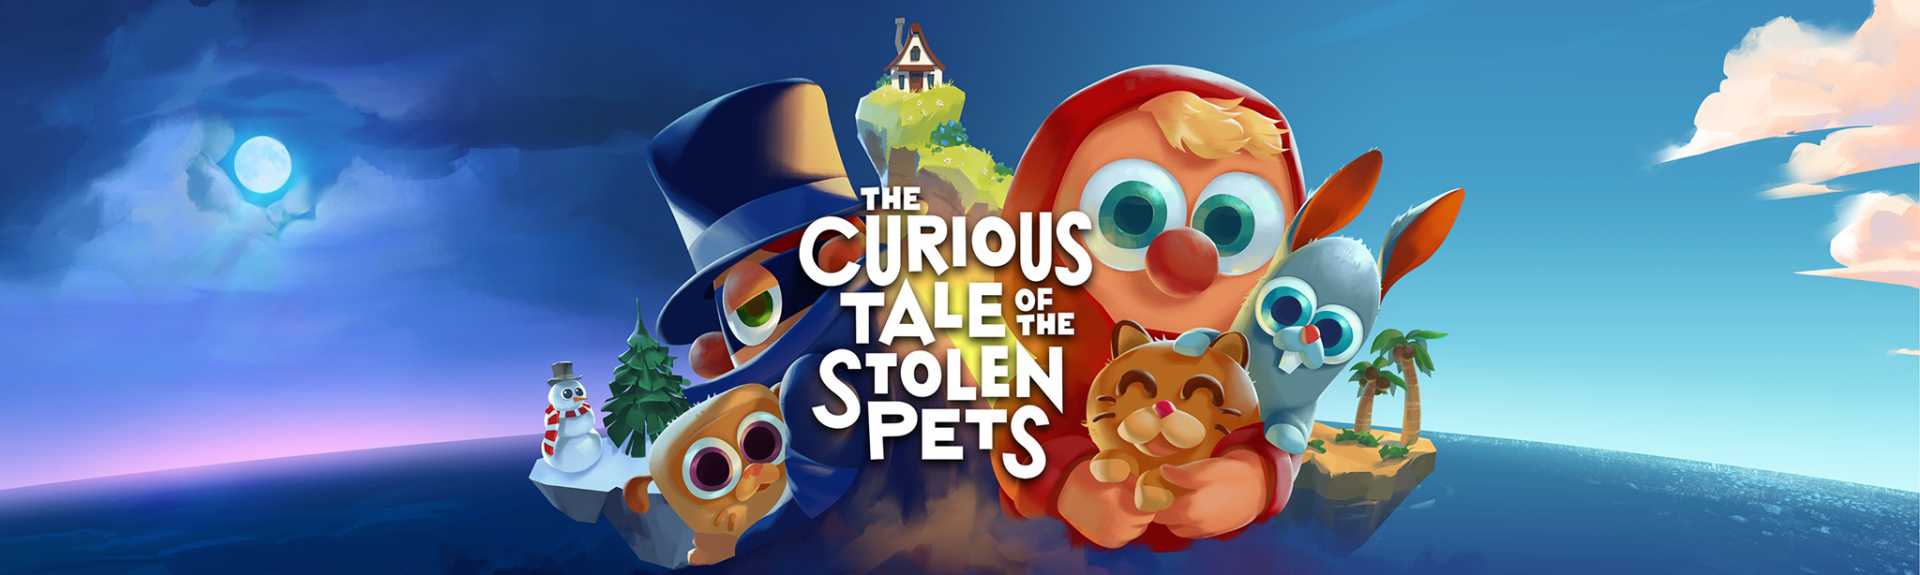 The Curious Tale of the Stolen Pets: ANÁLISIS